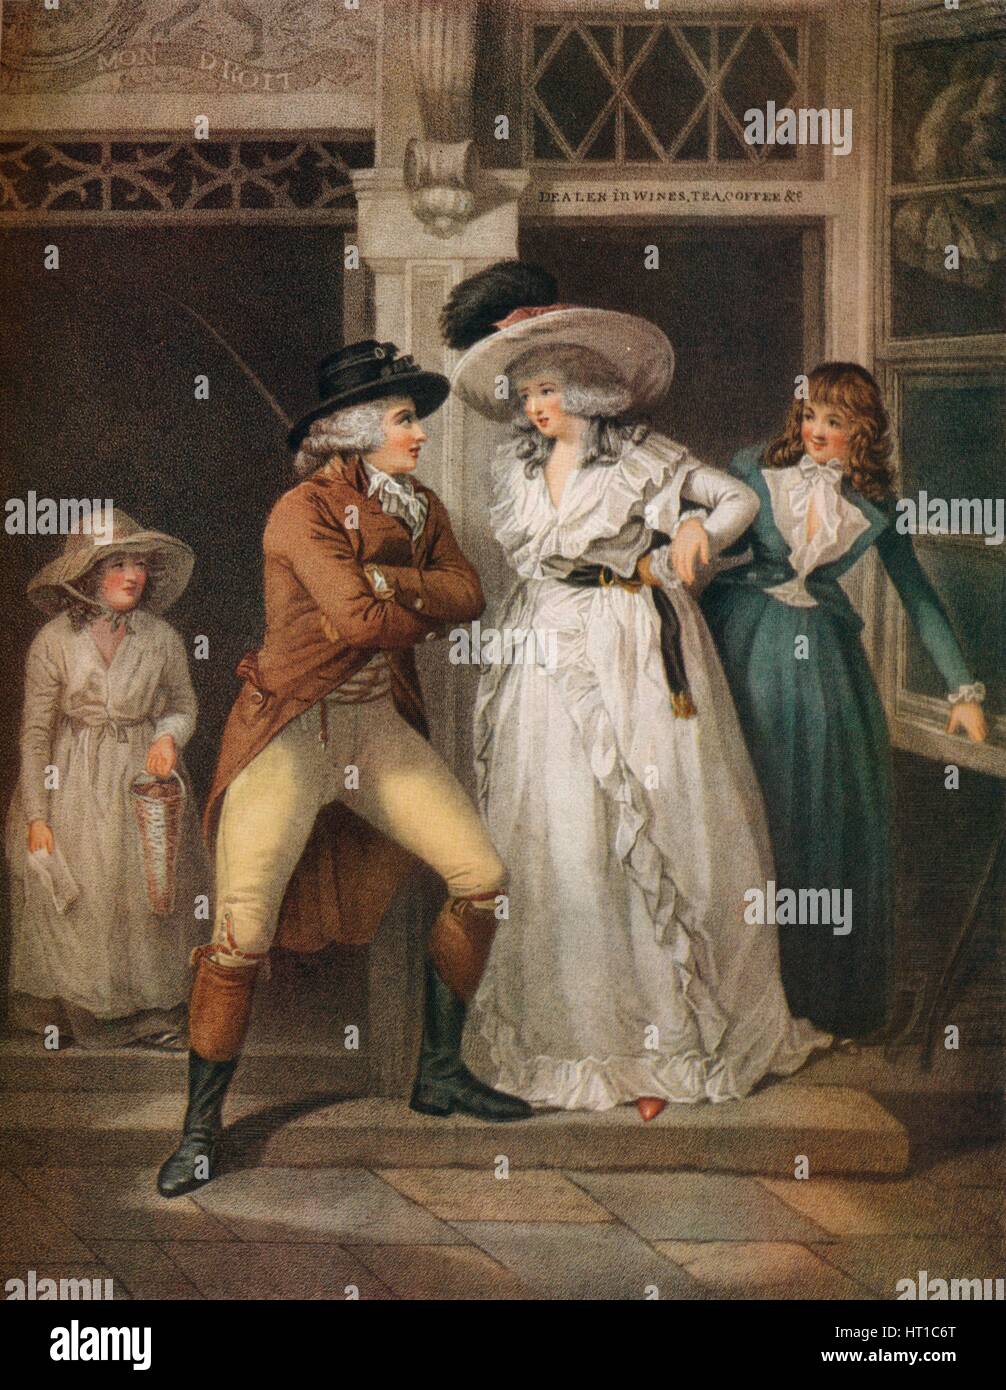 'The Tavern Door, Laetitia Deserted by her Seducer is Thrown on the Town', 1789. Artist: John Raphael Smith. Stock Photo